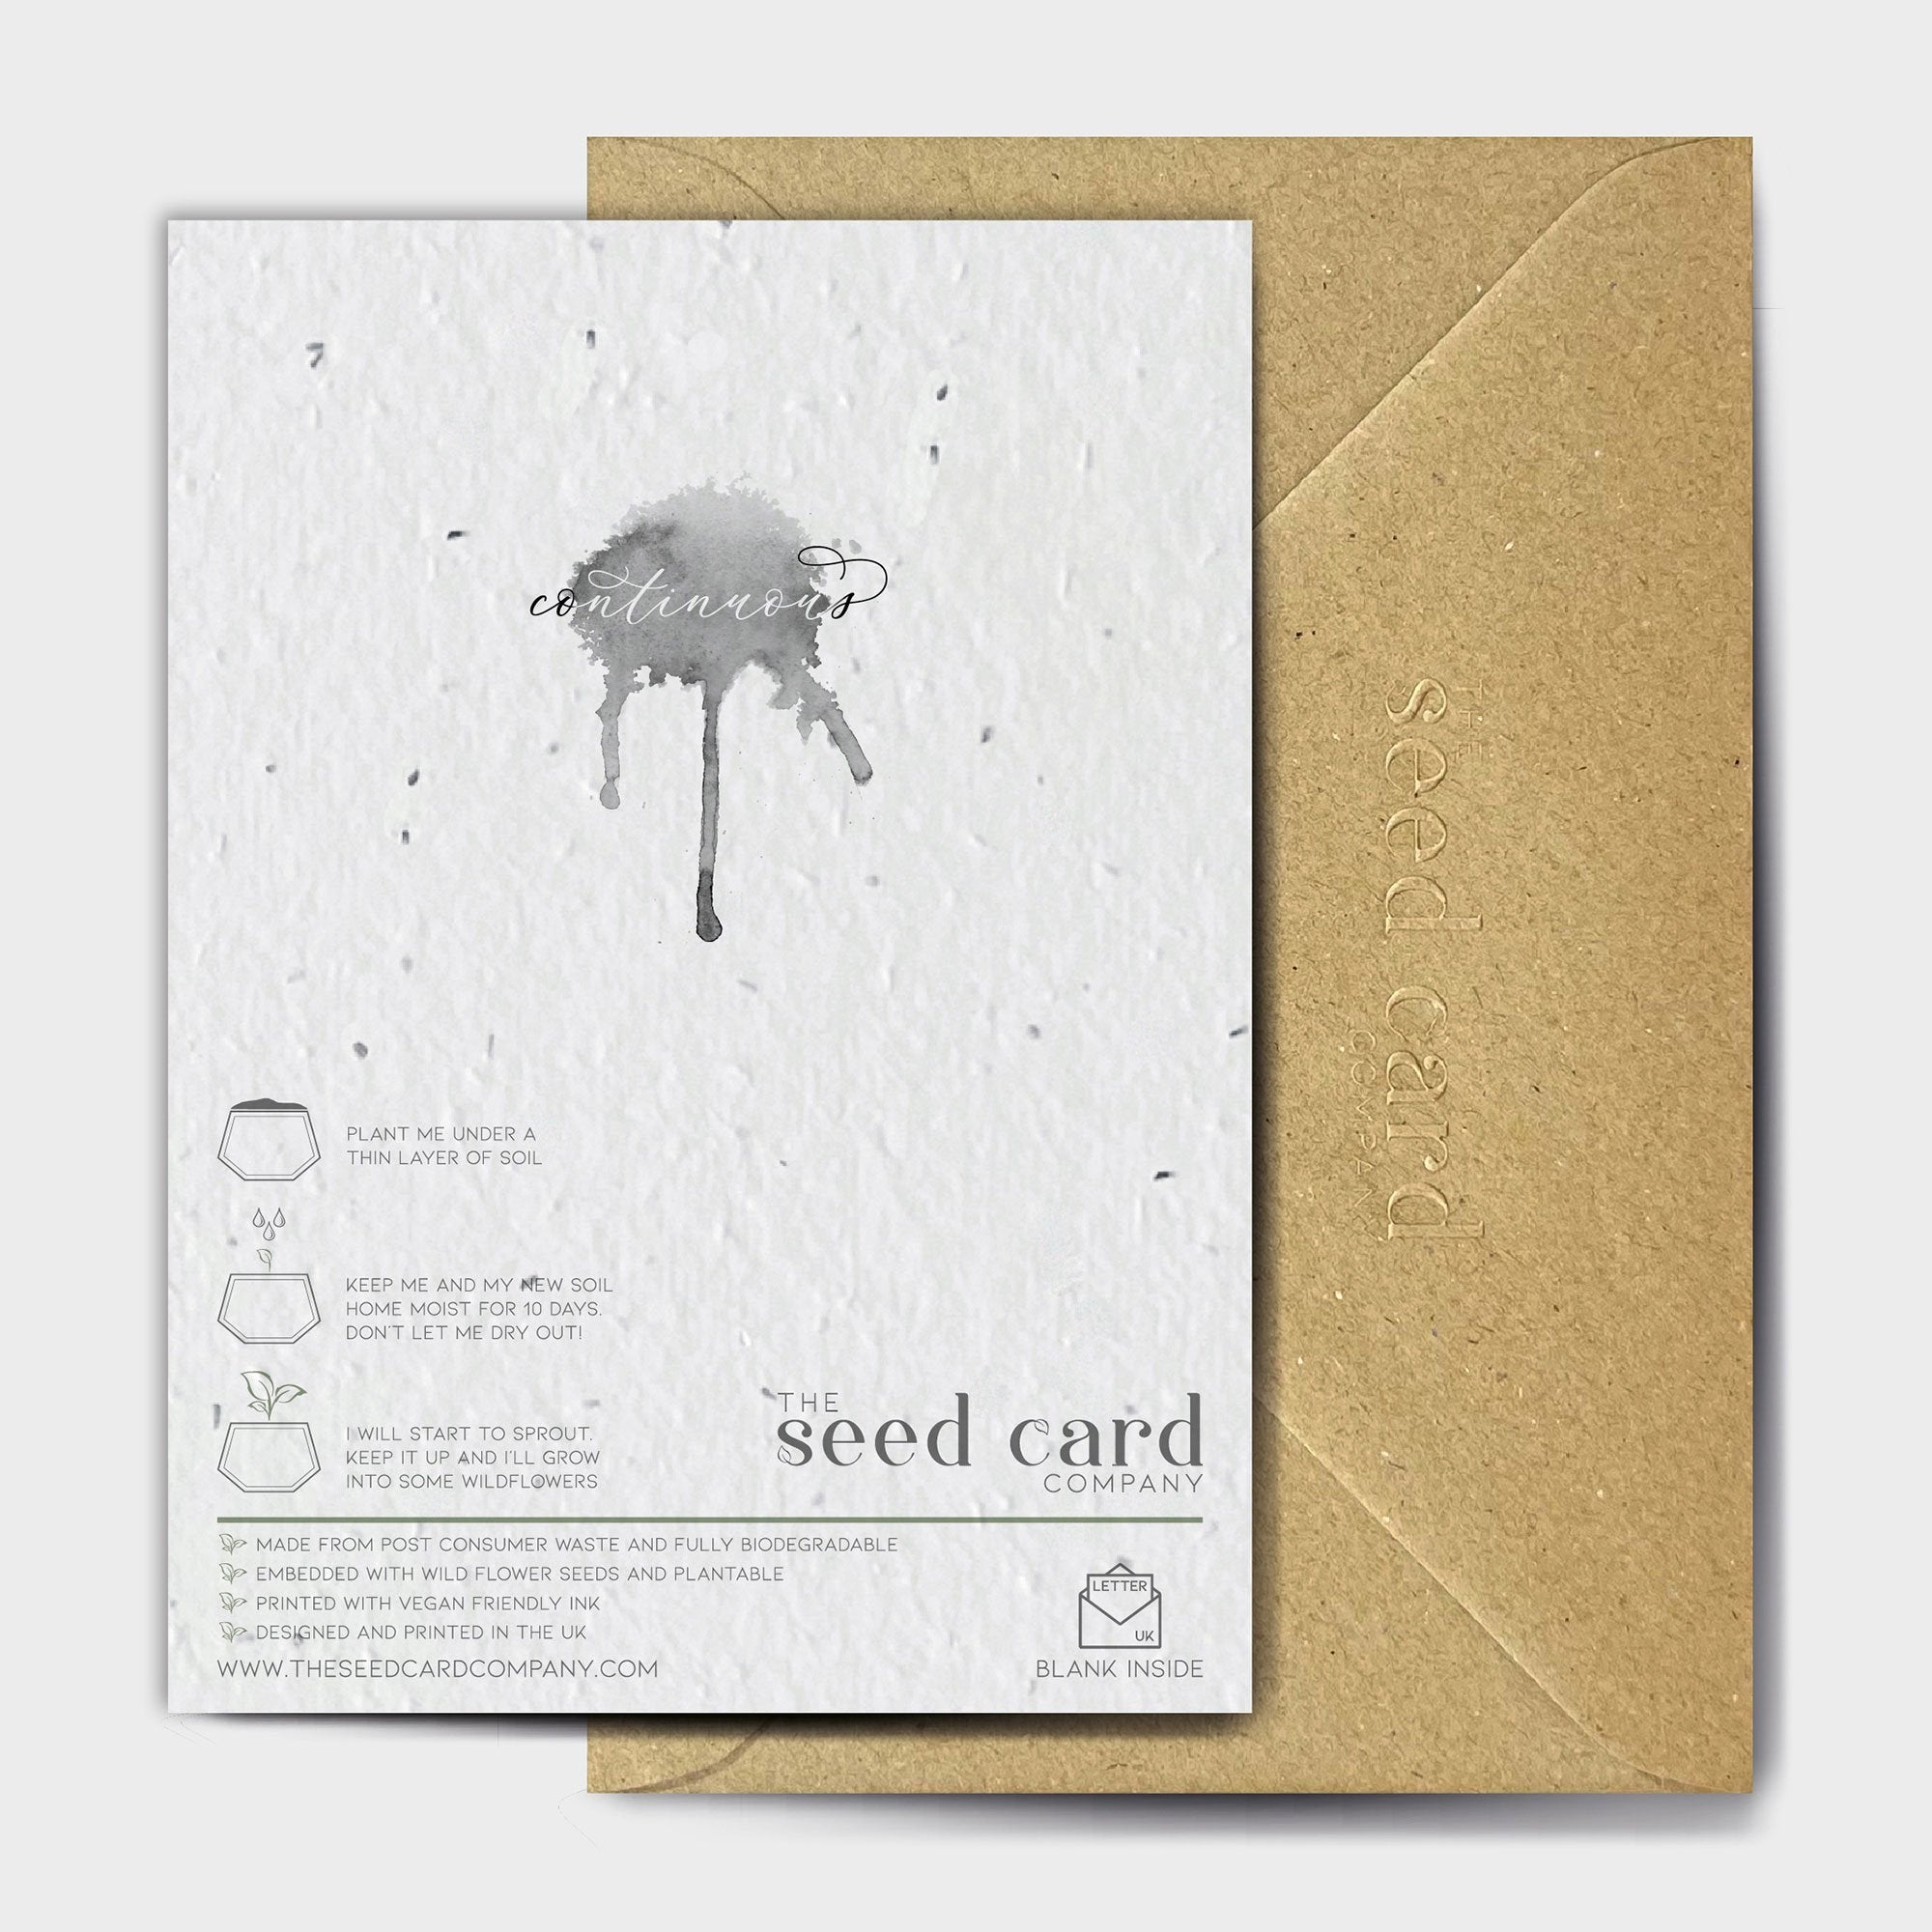 Shop online Does Not Contain Holly Seeds - 100% biodegradable seed-embedded cards Shop -The Seed Card Company